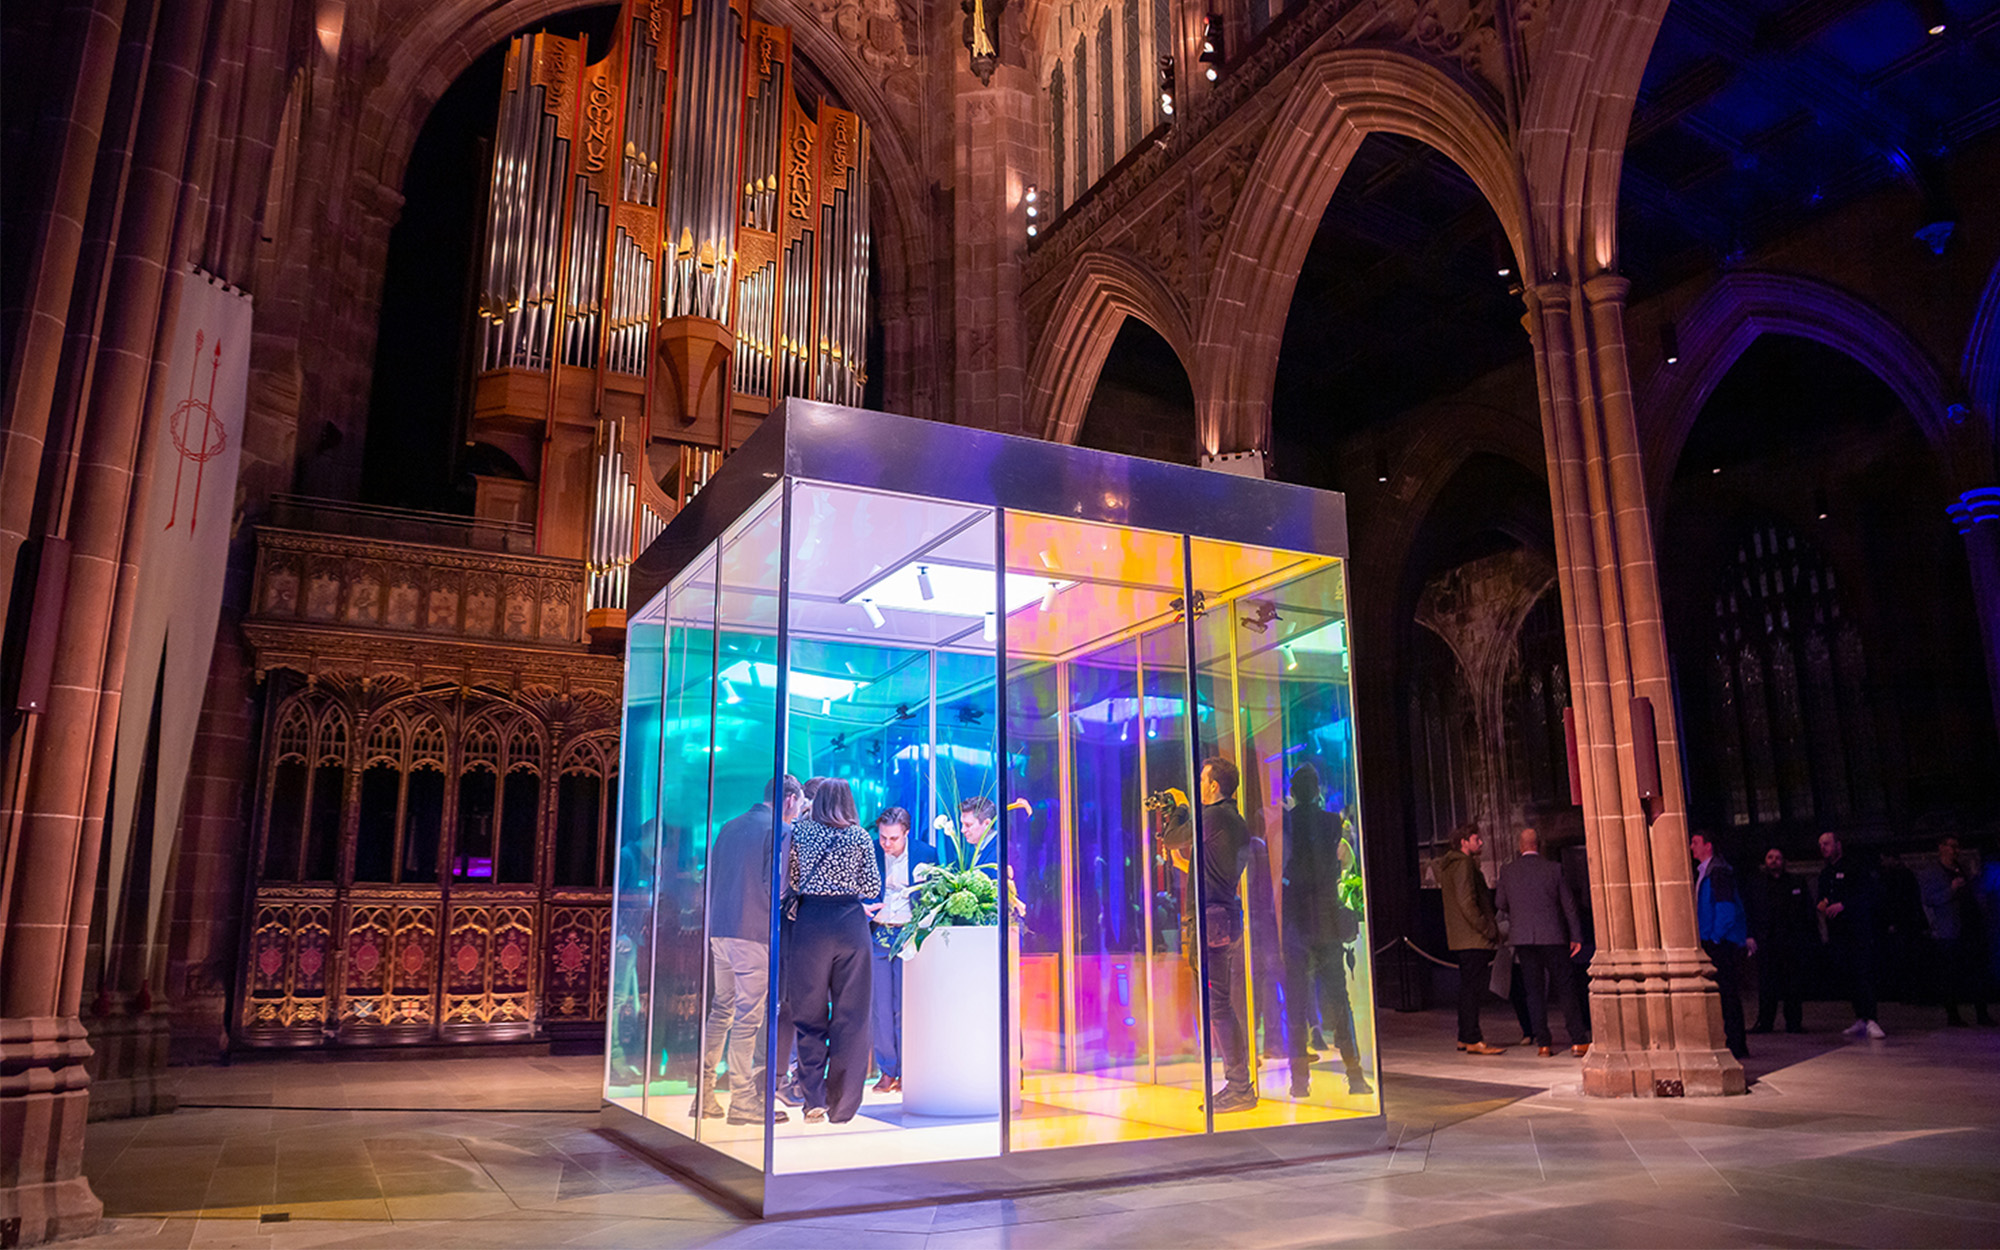 People inside of an illuminated glass cube, inside of a gothic cathedral with stone archways.